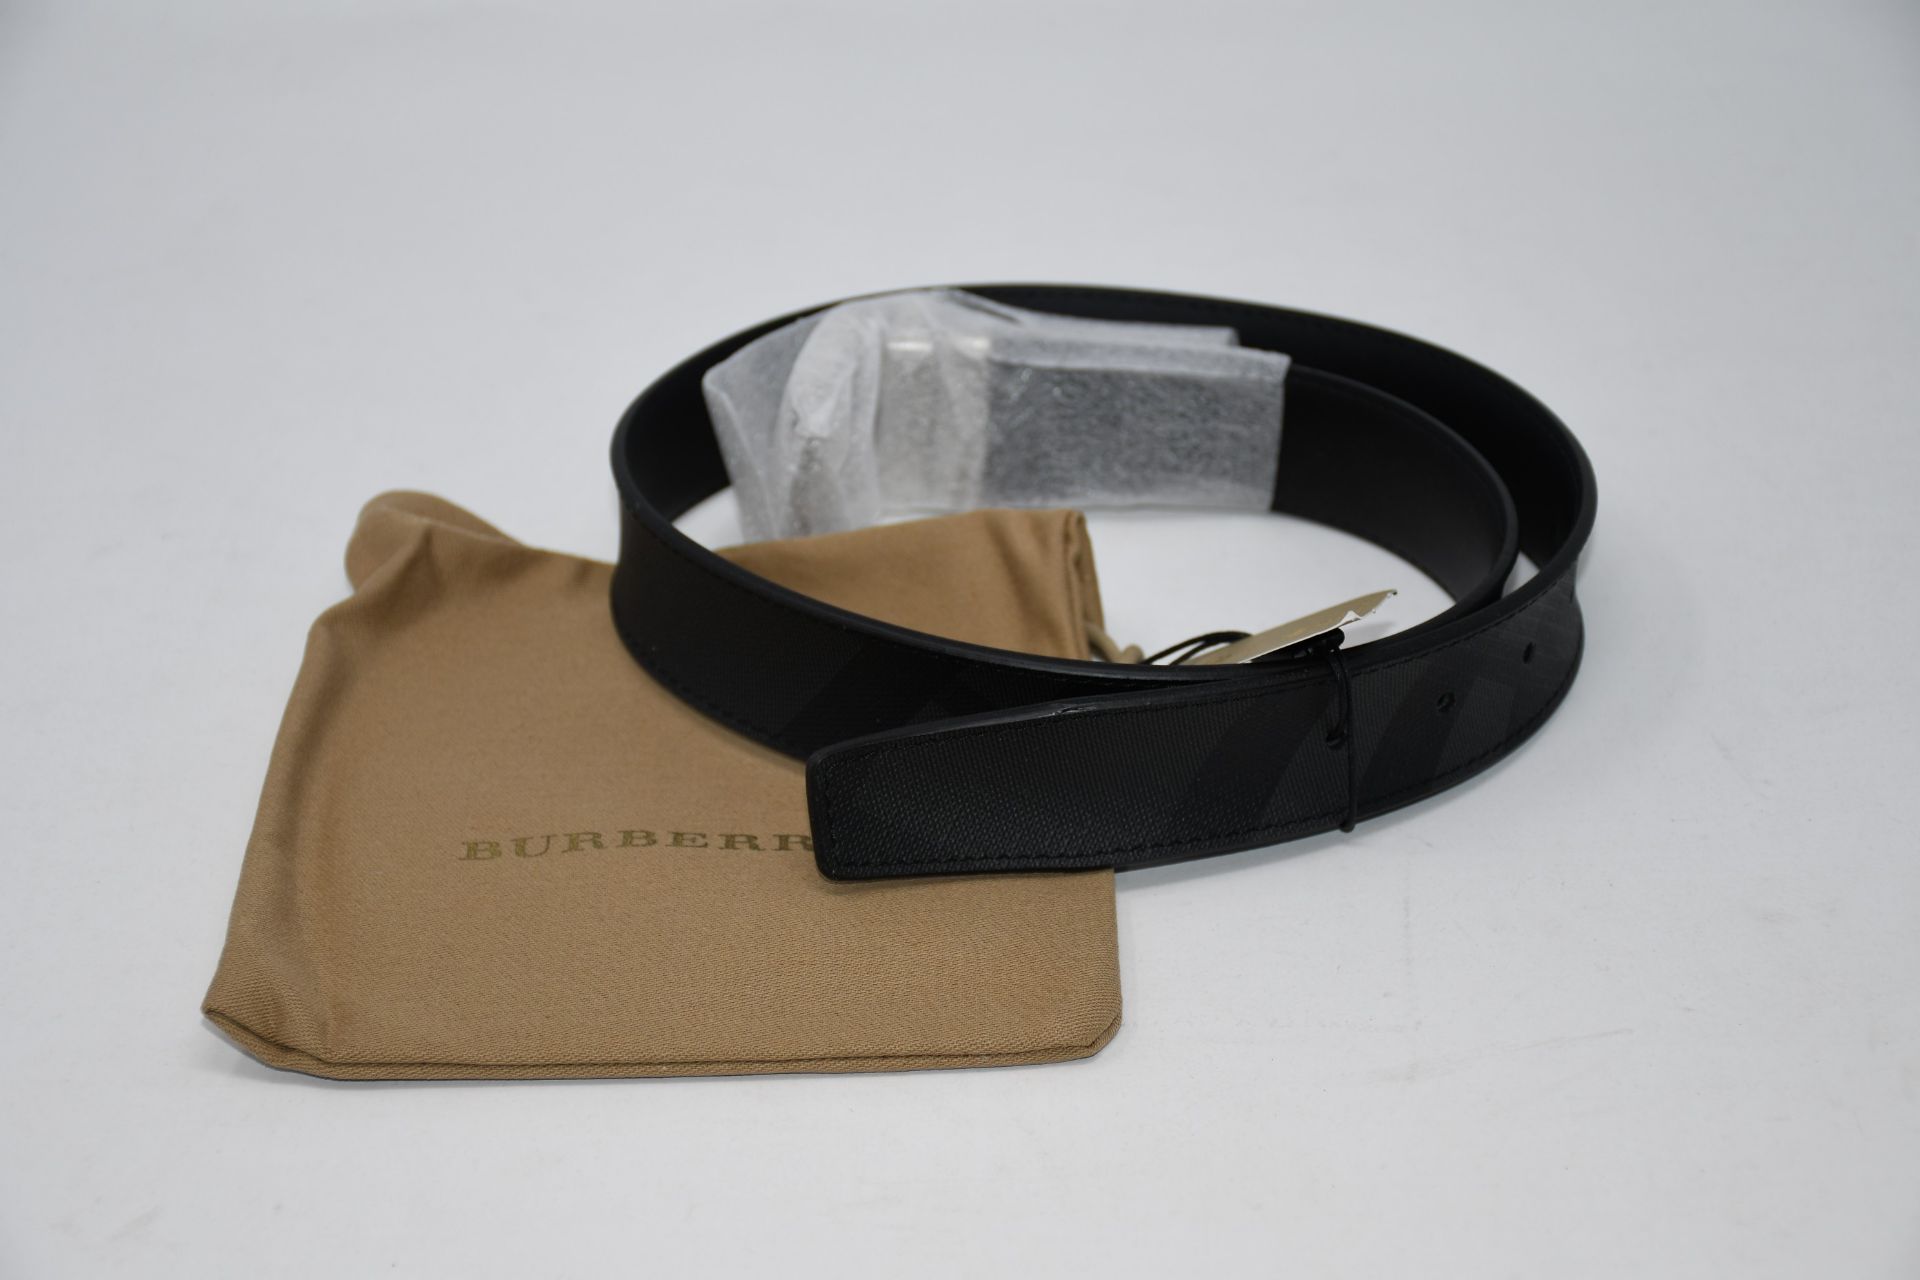 One as new Burberry charcoal / black belt size 75 (405600 1004).